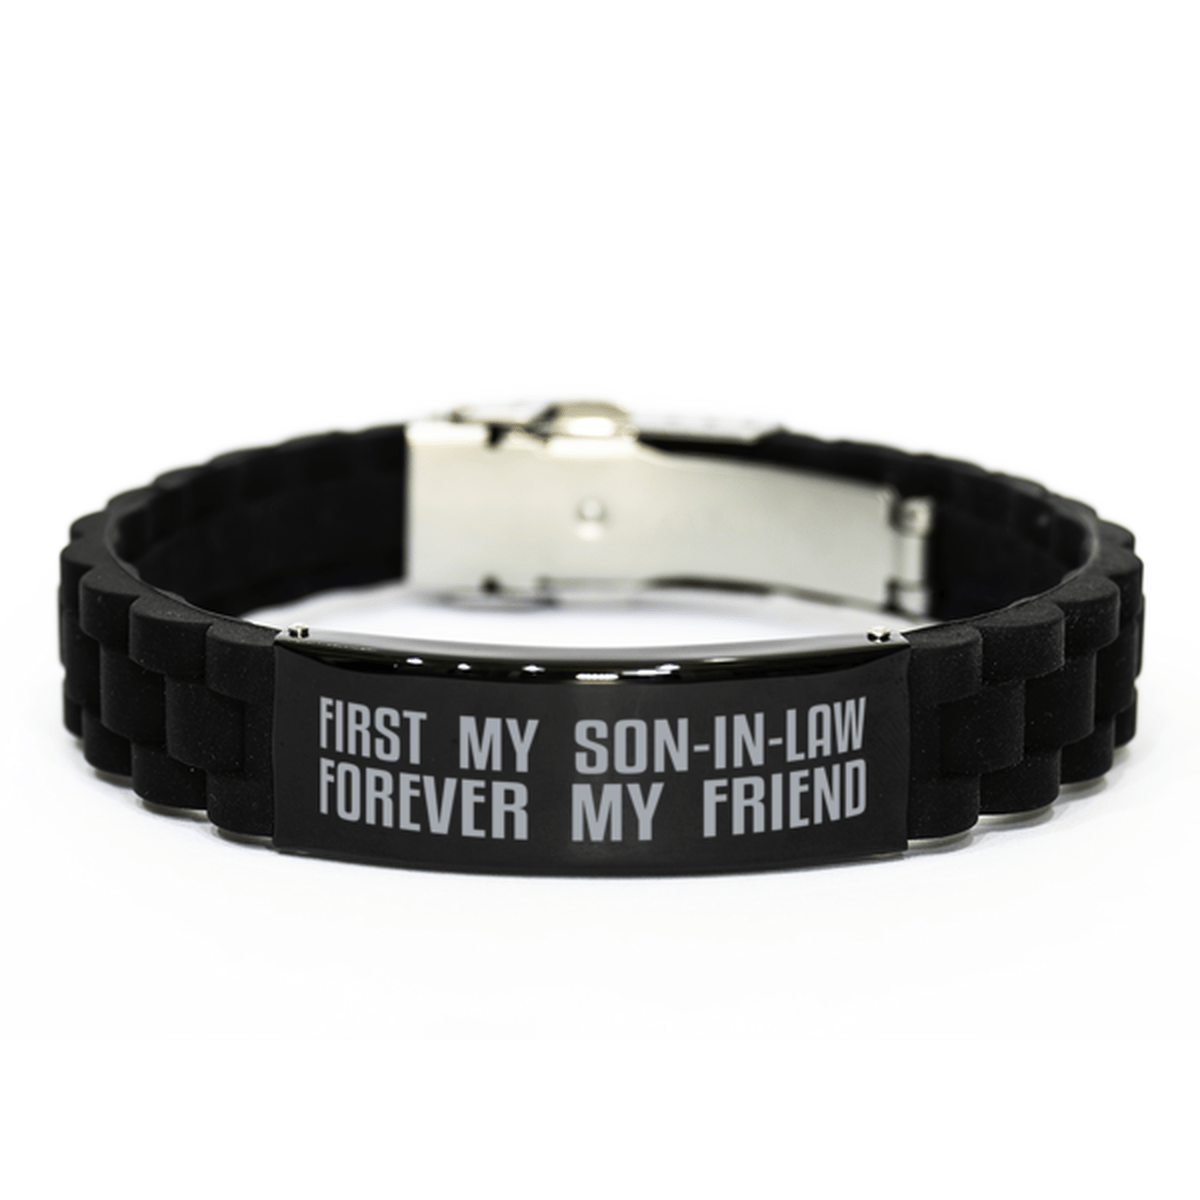 Unique Son-in-law Bracelet, First My Son-in-law Forever My Friend, Best Gift for Son-in-law Birthday, Christmas